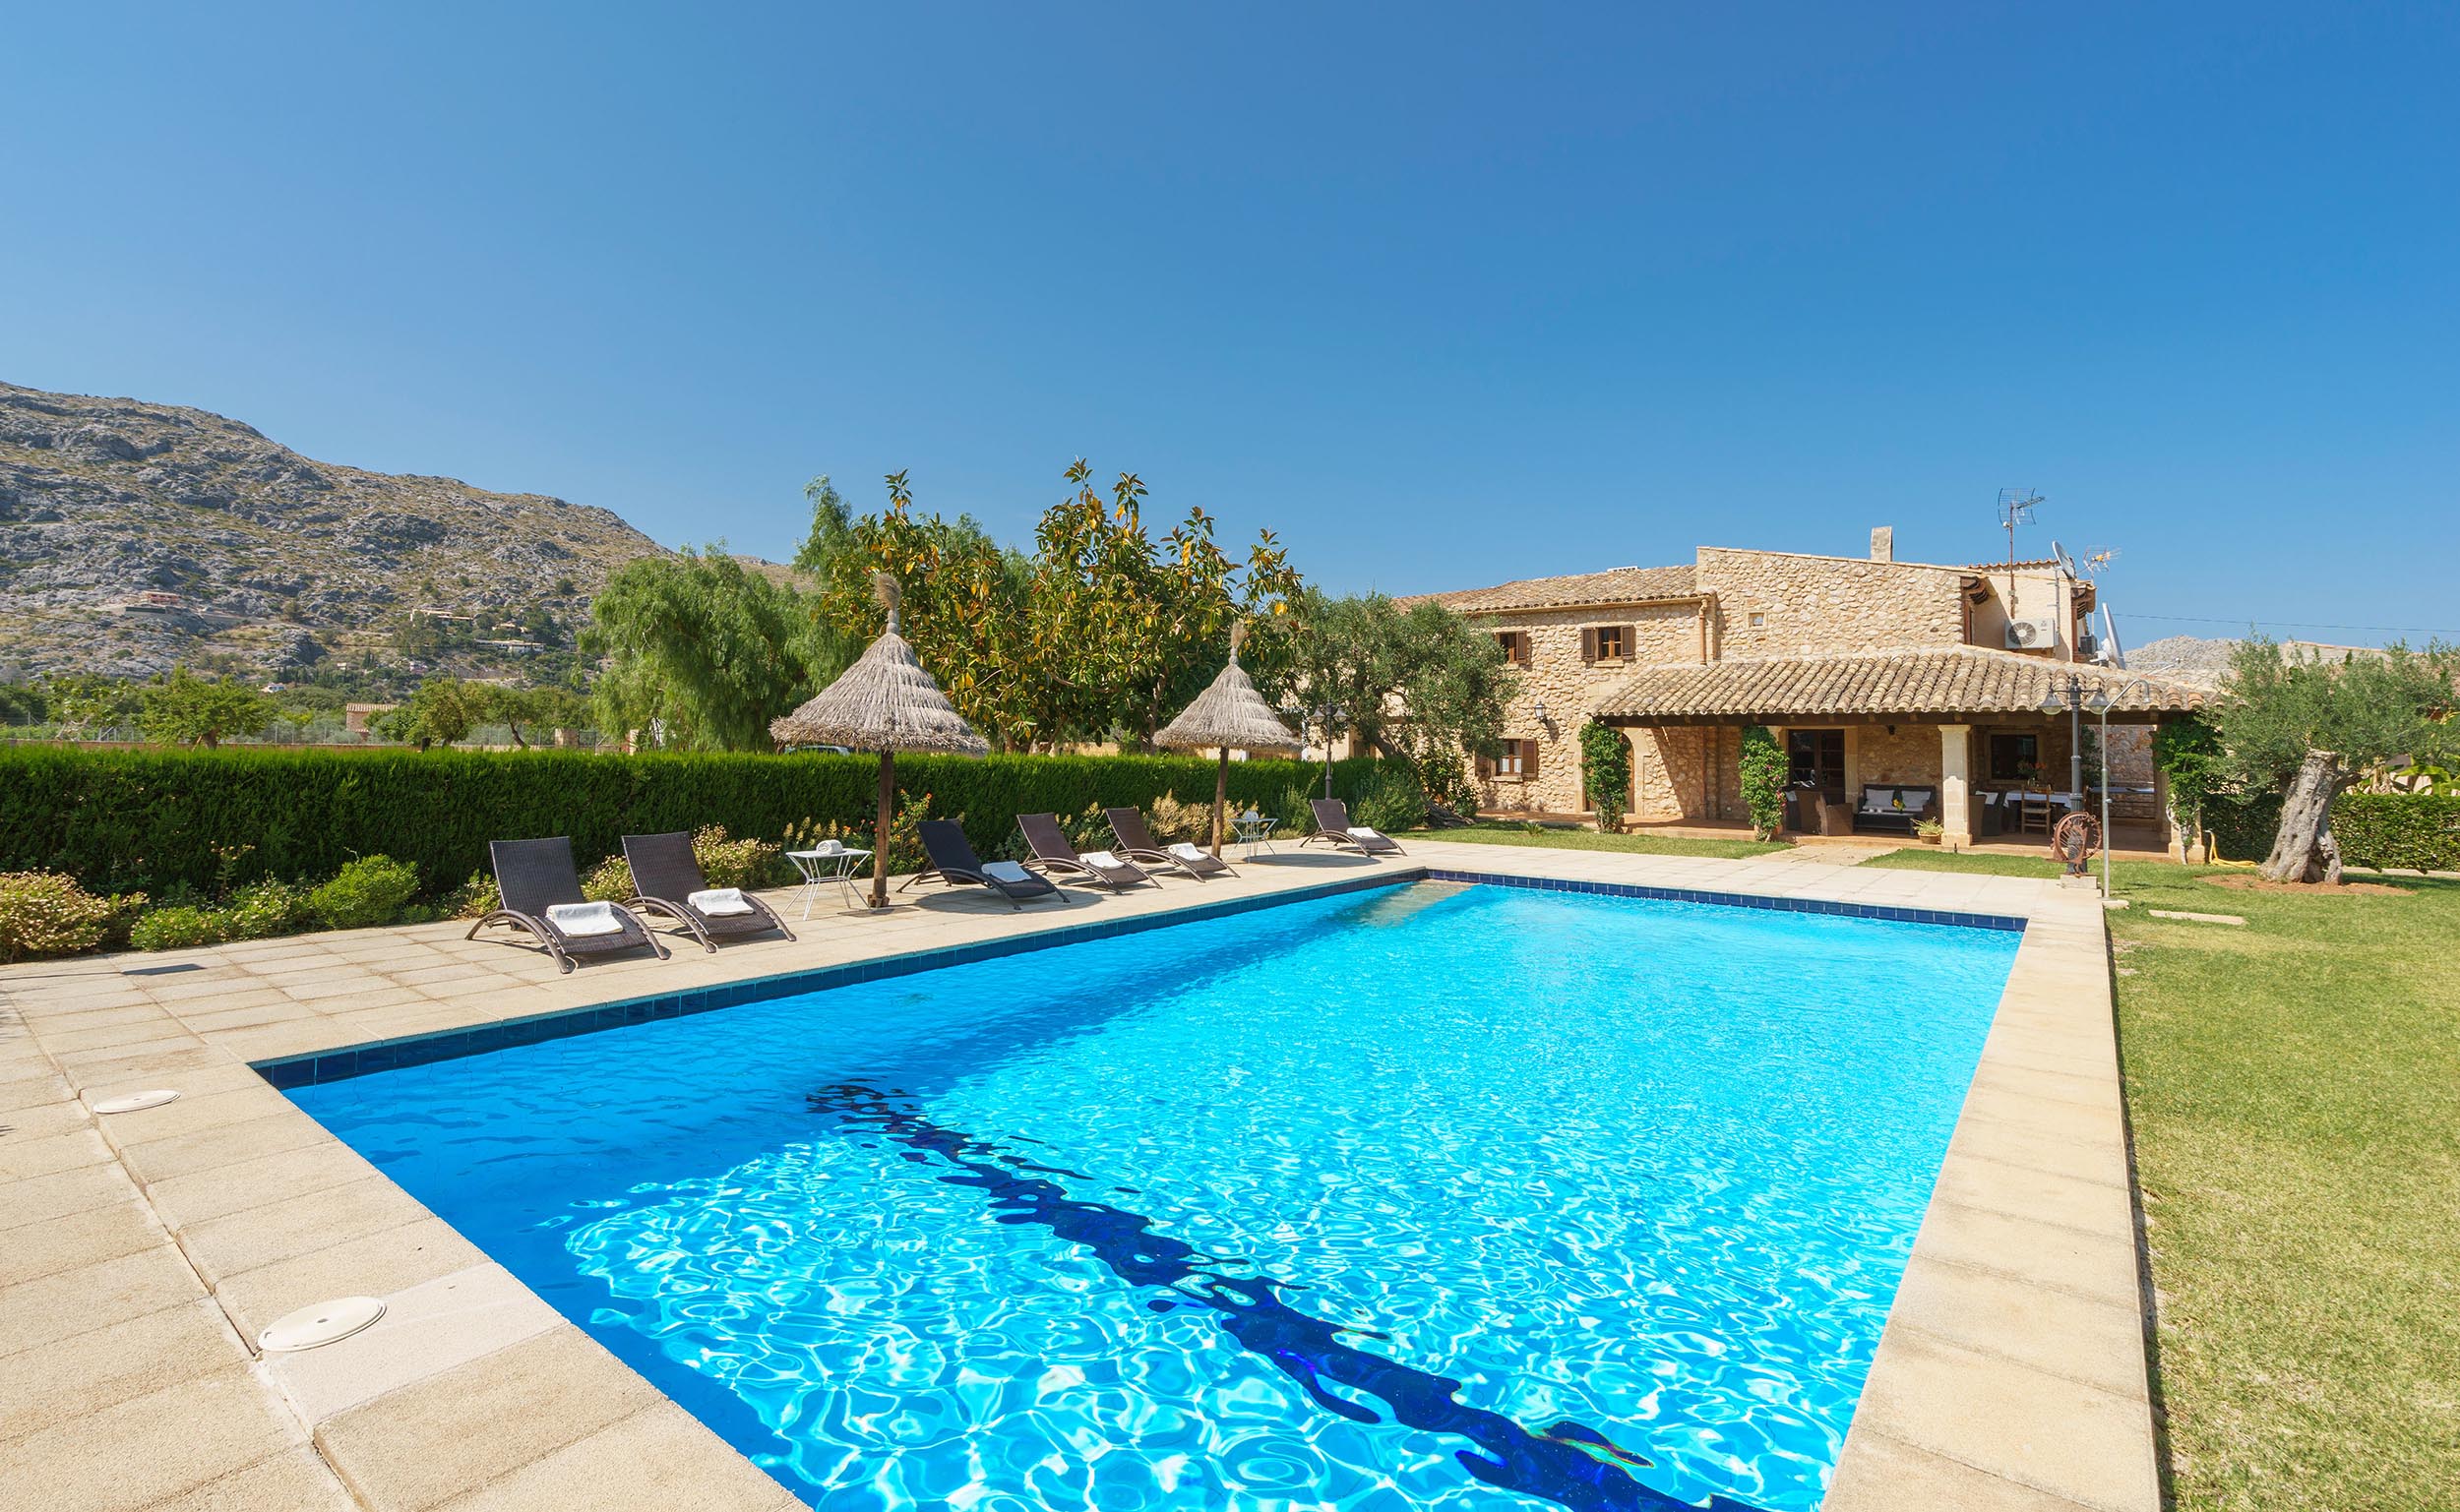 Villa Agnes is a country villa with heated pool close to Pollensa